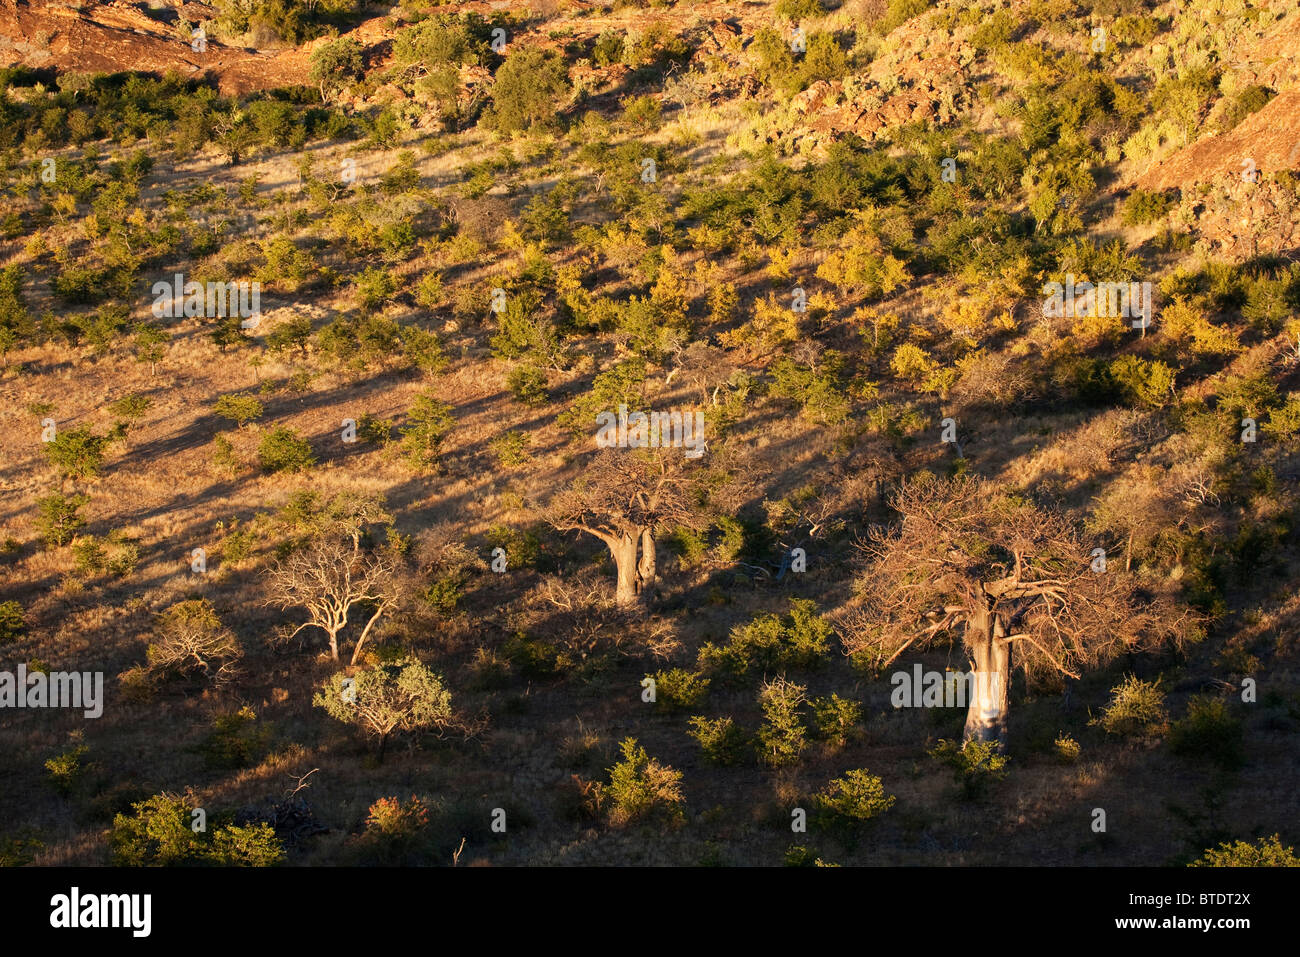 Aerial view of Limpopo river valley vegetation with Baobab trees Stock Photo